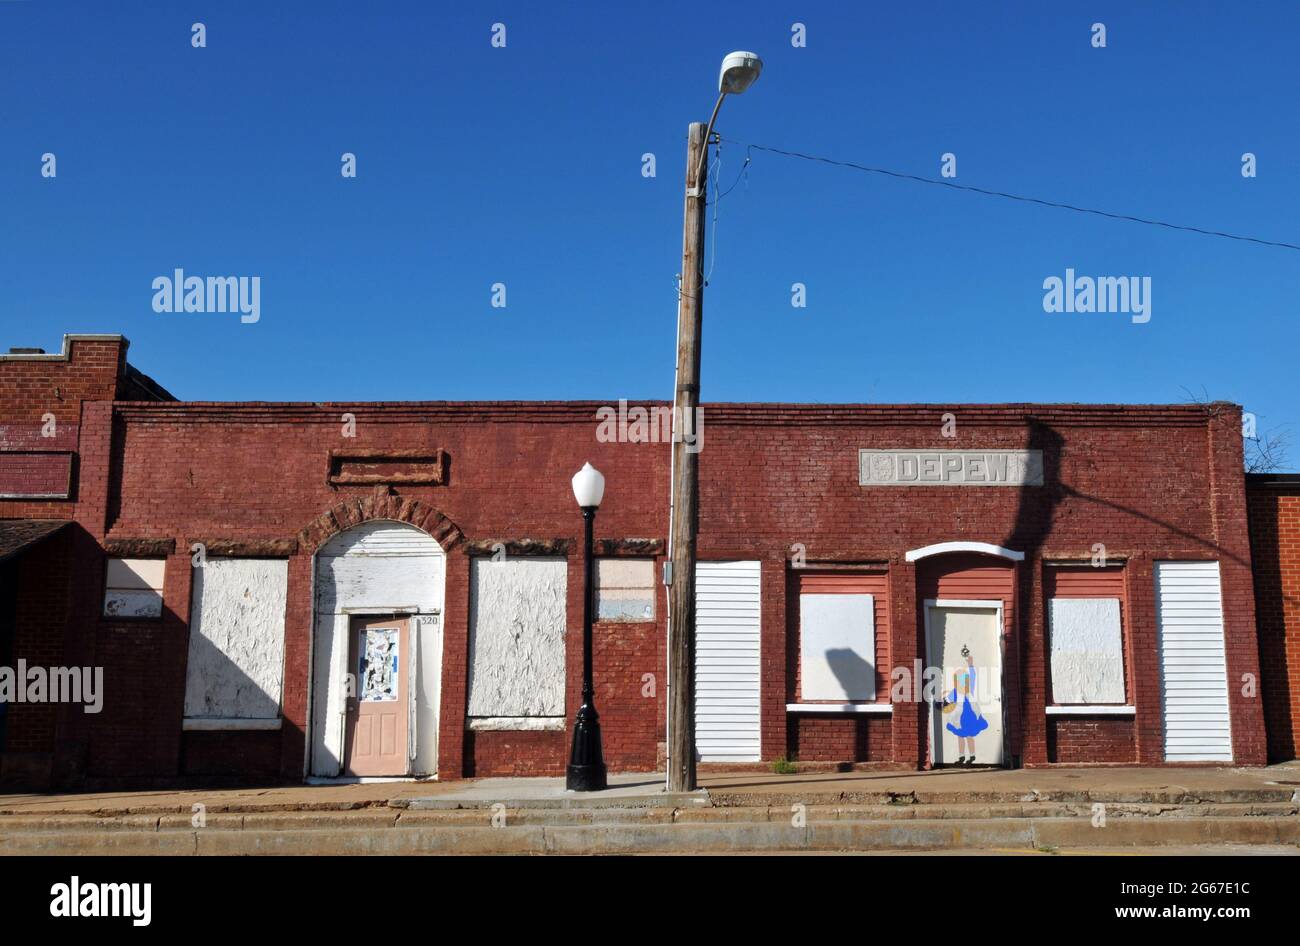 Historic buildings with boarded-up storefronts stand along Main Street in the Route 66 town of Depew, Oklahoma. Stock Photo